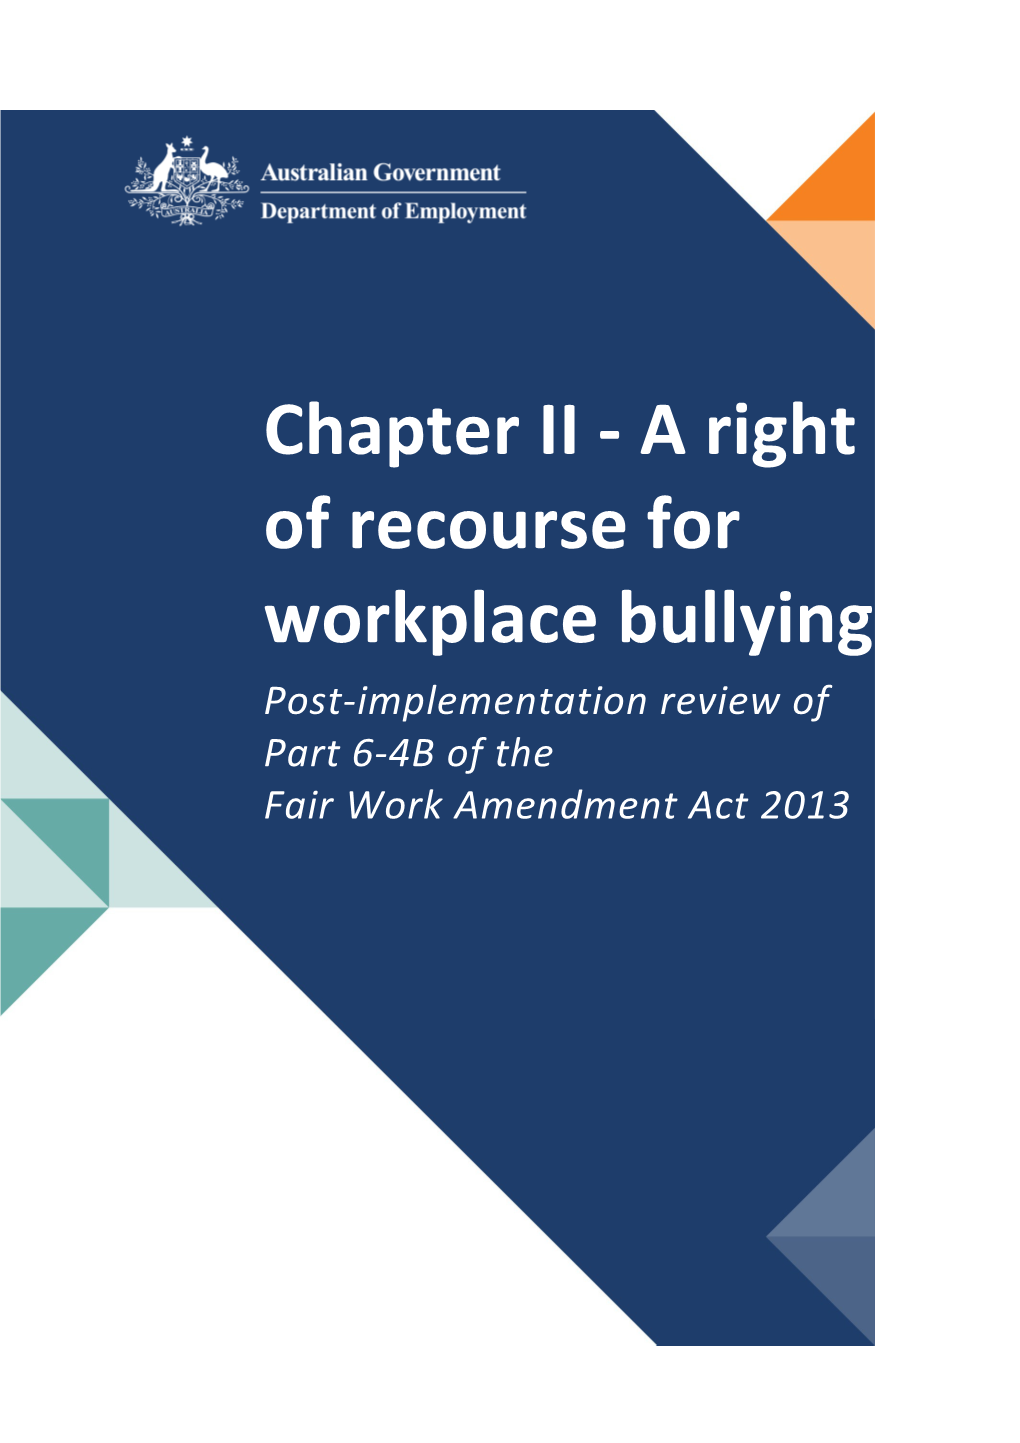 Chapter II - a Right of Recourse for Workplace Bullying